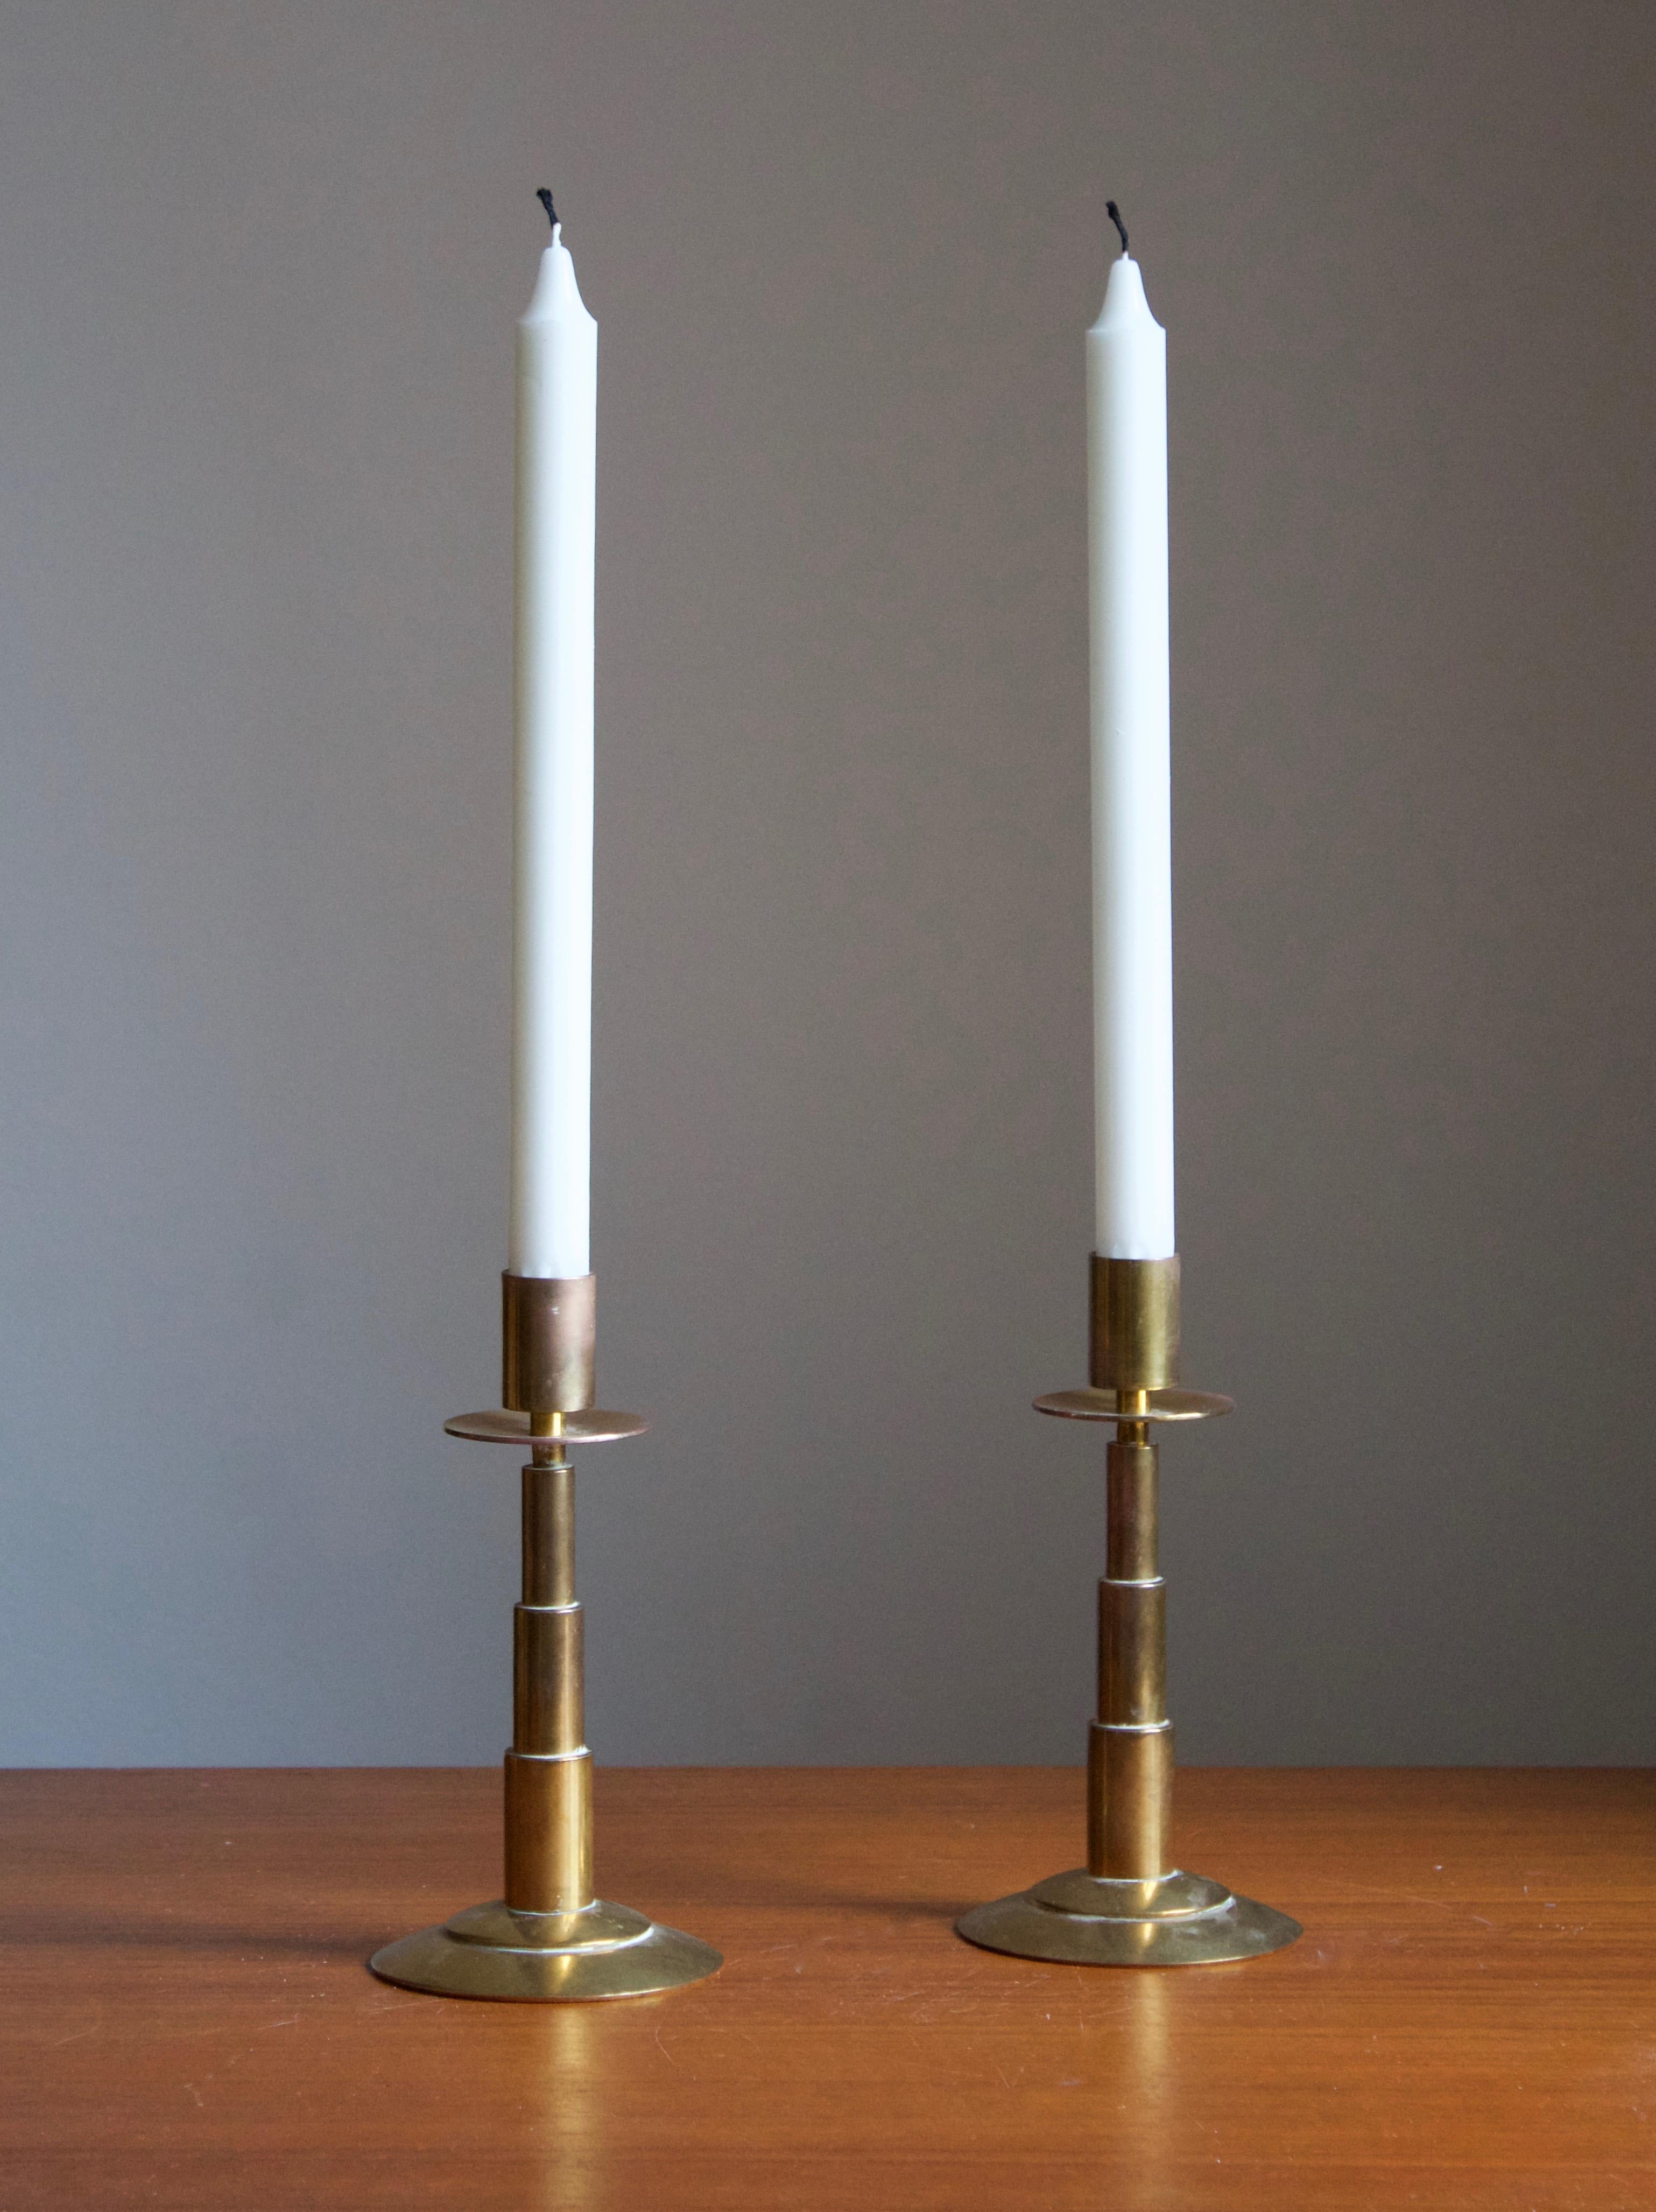 A pair of modernist candlesticks. Designed and produced by Dantorp, Denmark, 1960s. In brass.